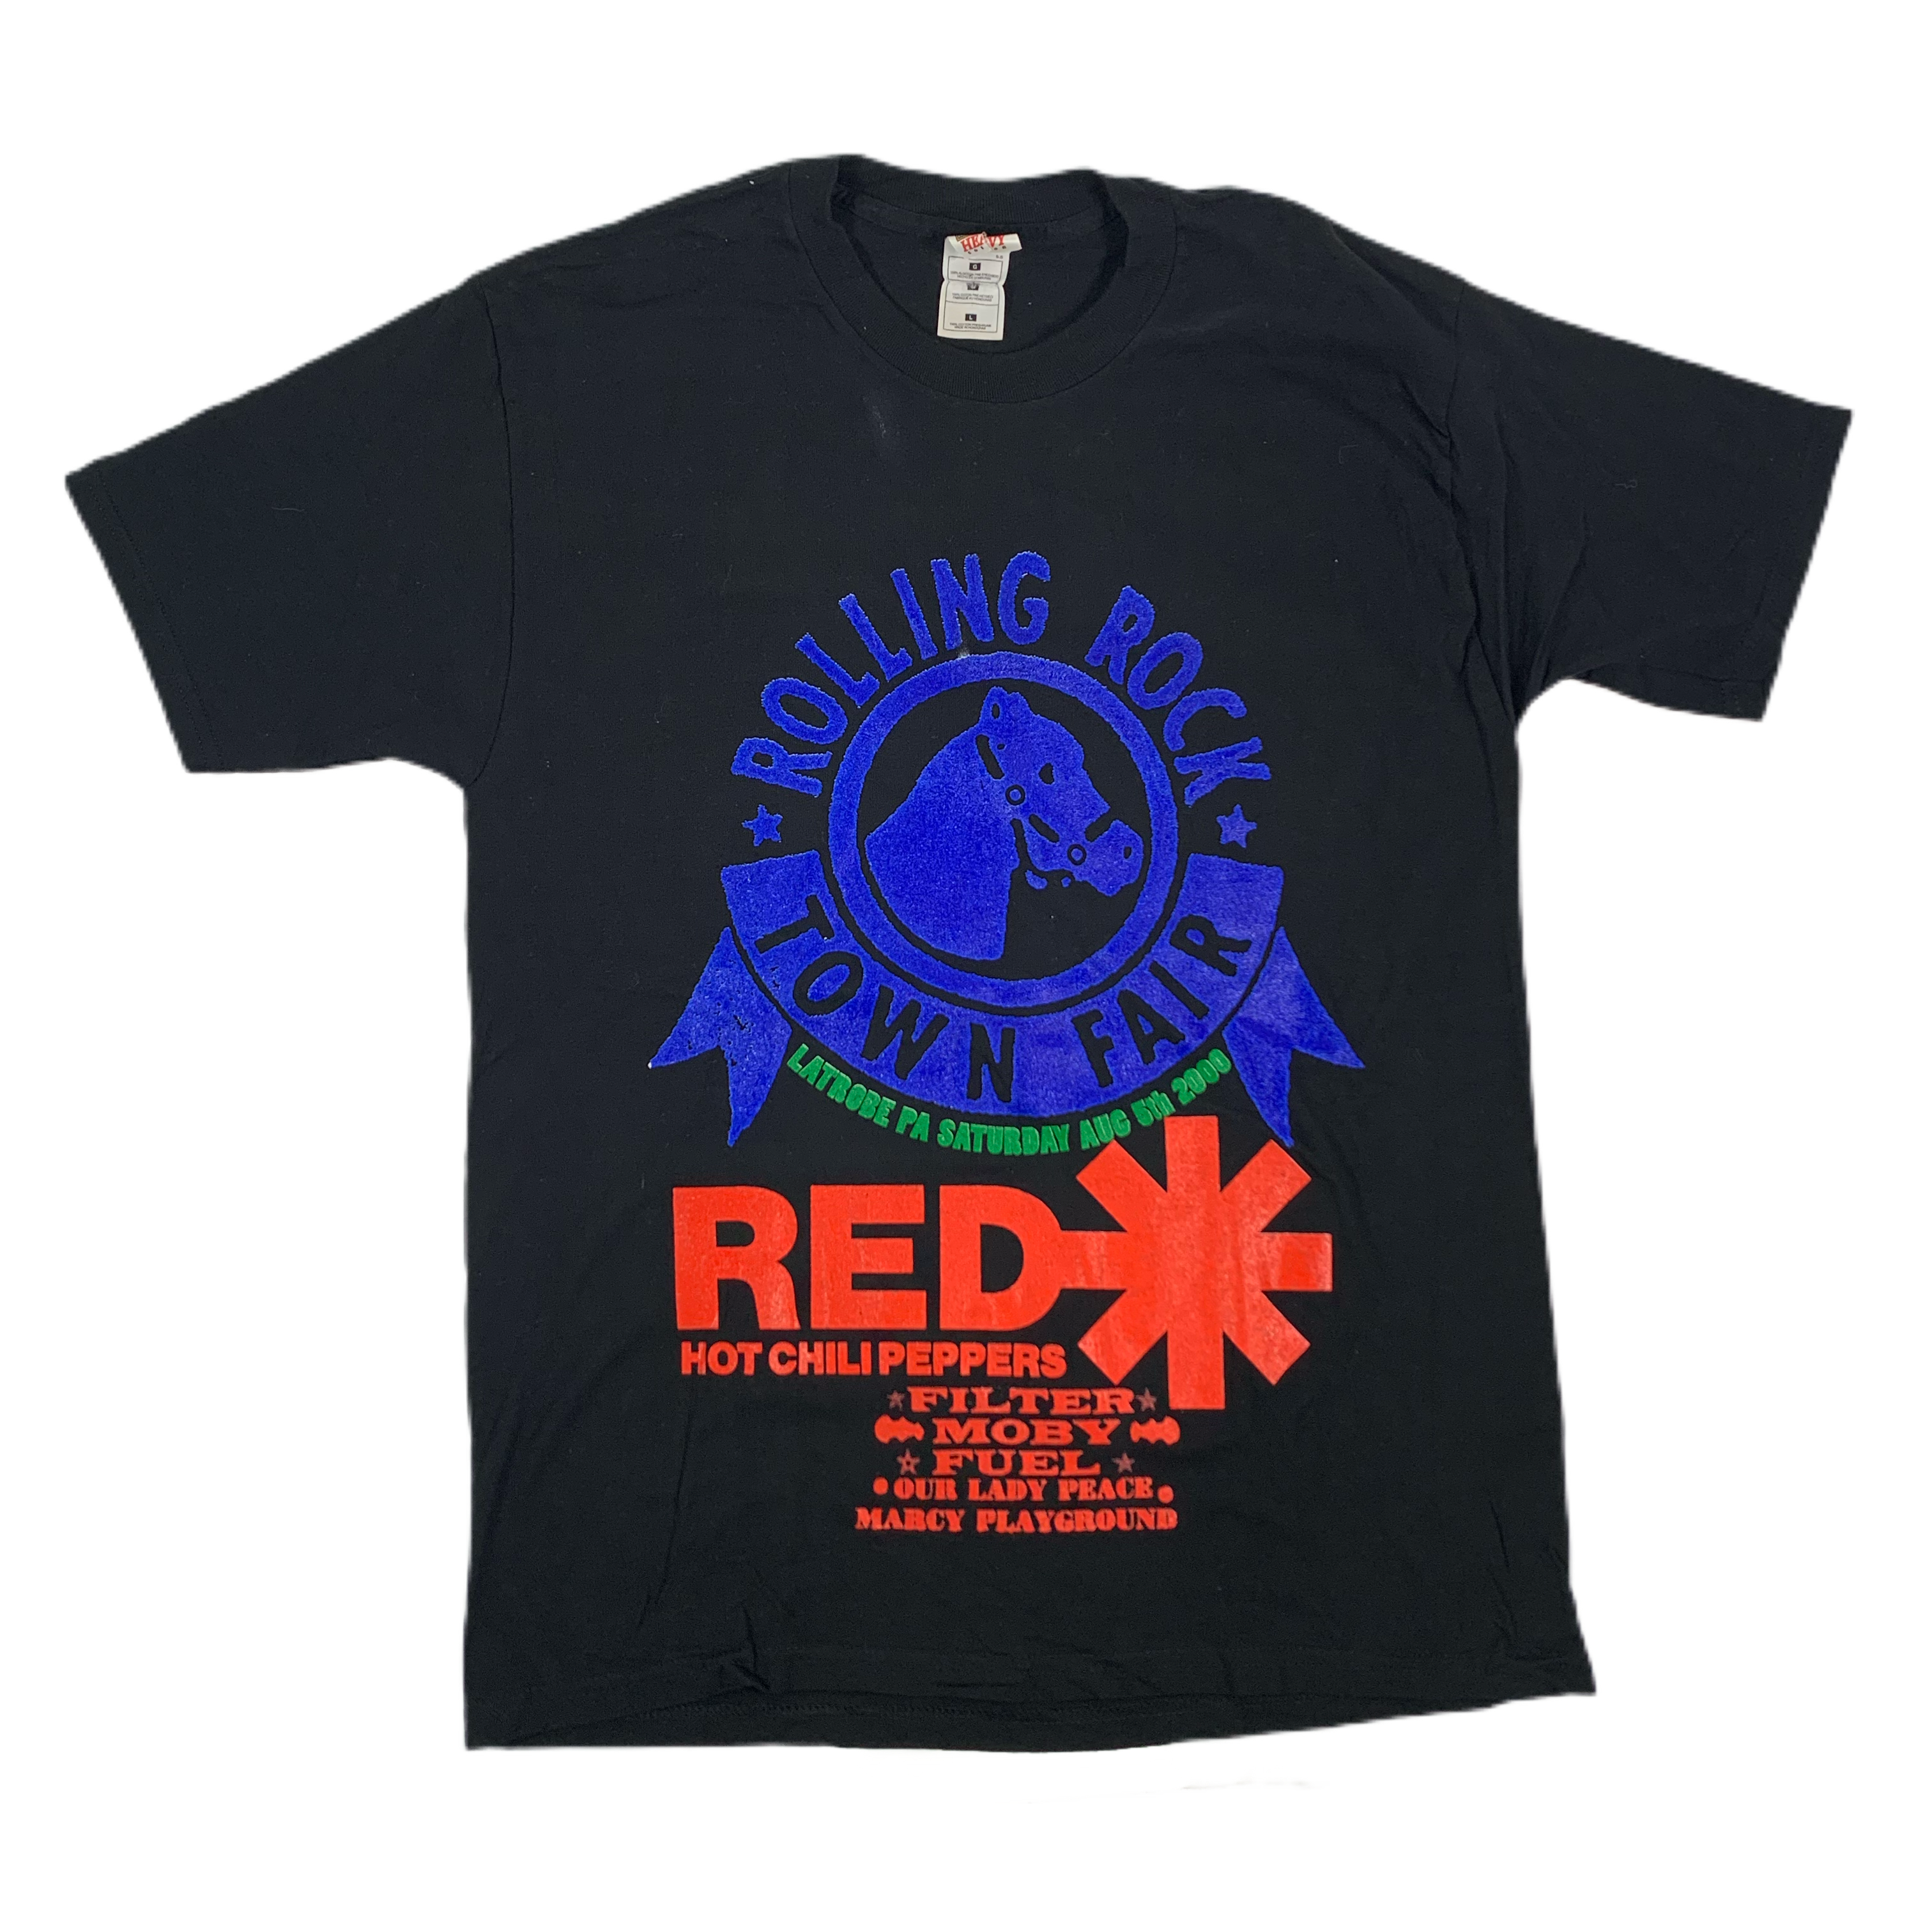 Vintage Rolling Rock “Red Hot Chili Peppers” T-Shirt